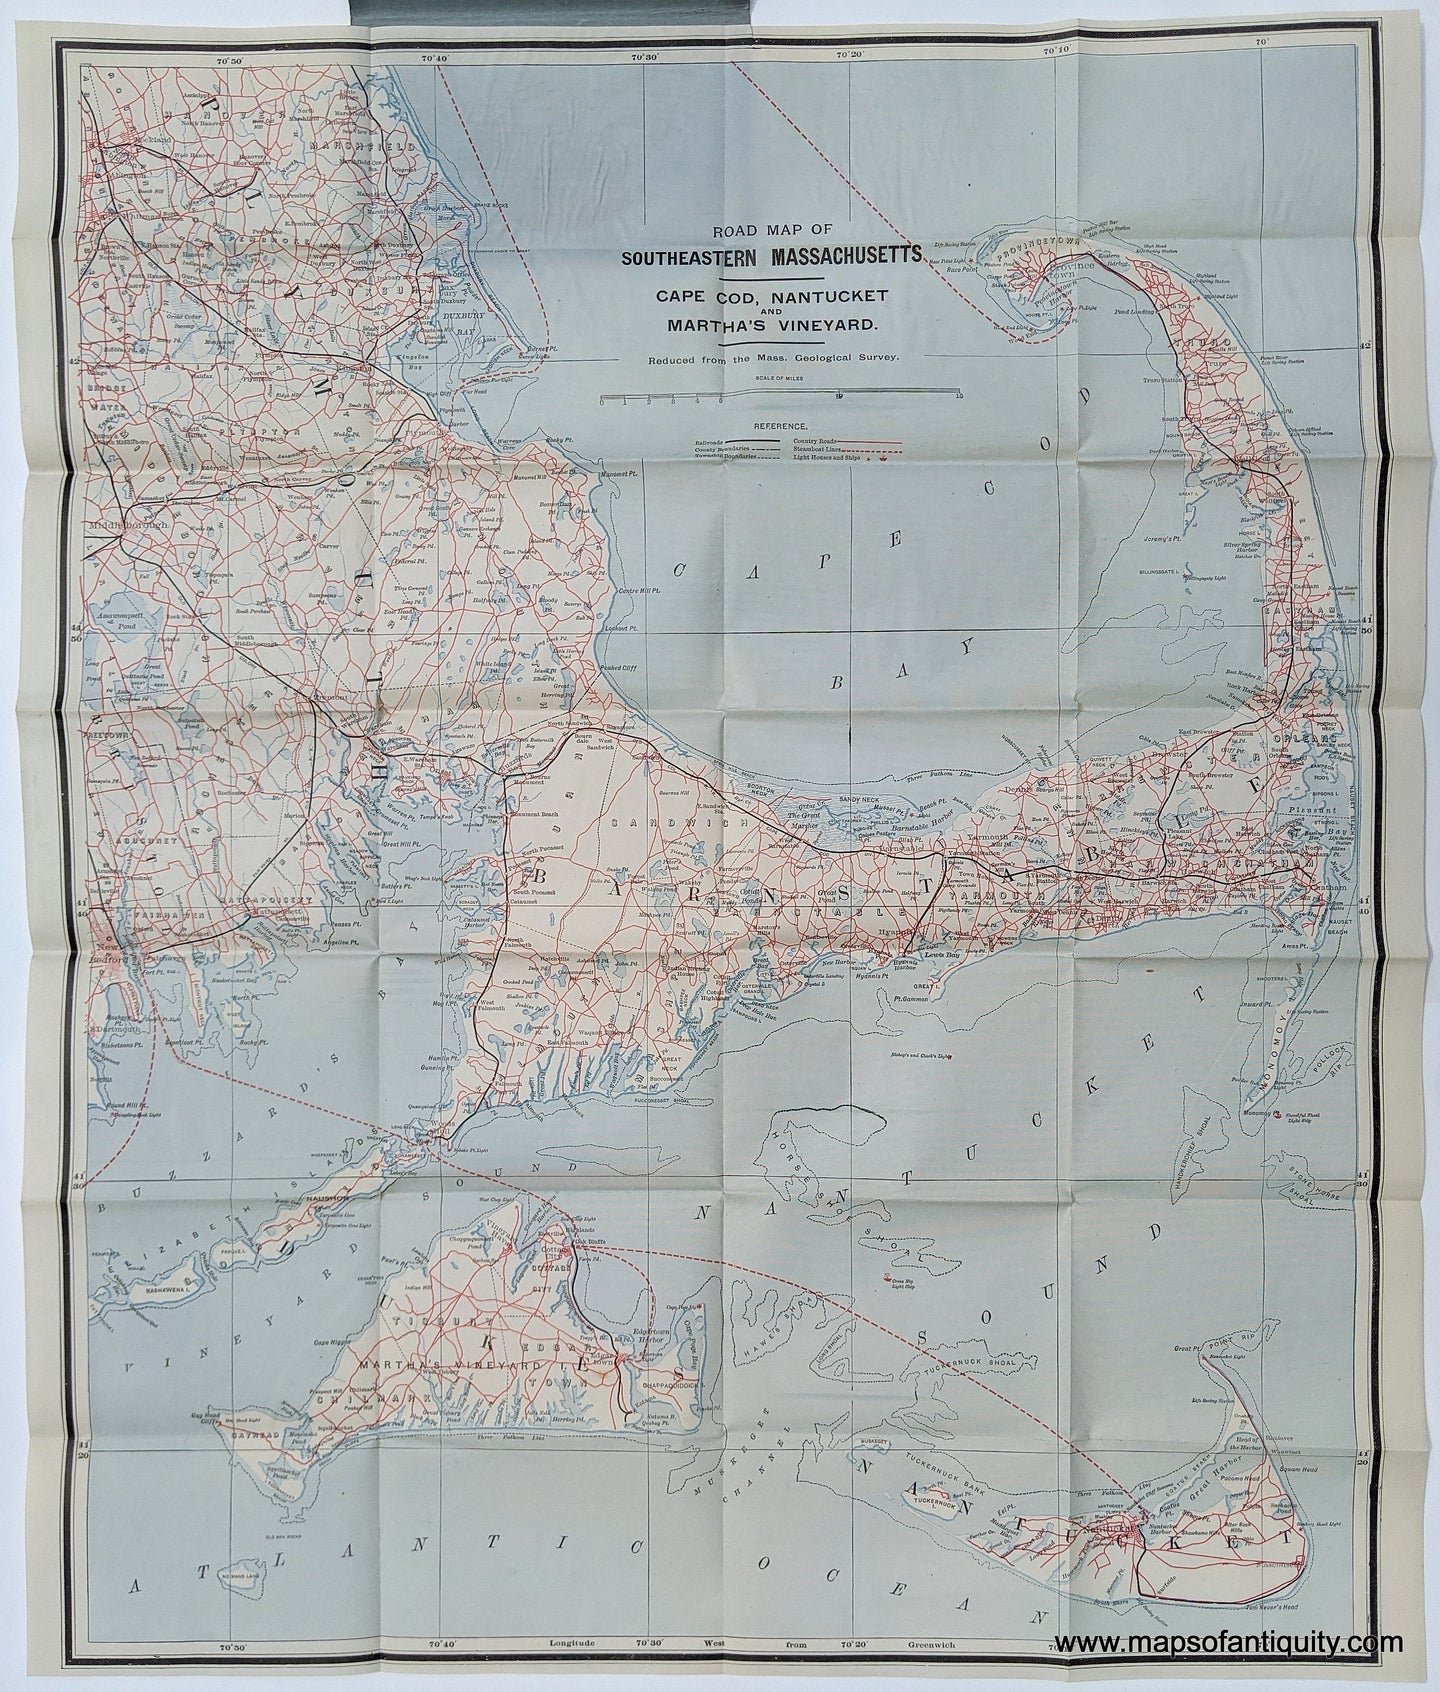 Genuine Antique Printed Color Map-Road Map of Southeastern Massachusetts Cape Cod, Nantucket, and Martha's Vineyard-c. 1895-J.F. Murray / Old Colony Railroad-Maps-Of-Antiquity-1800s-19th-century